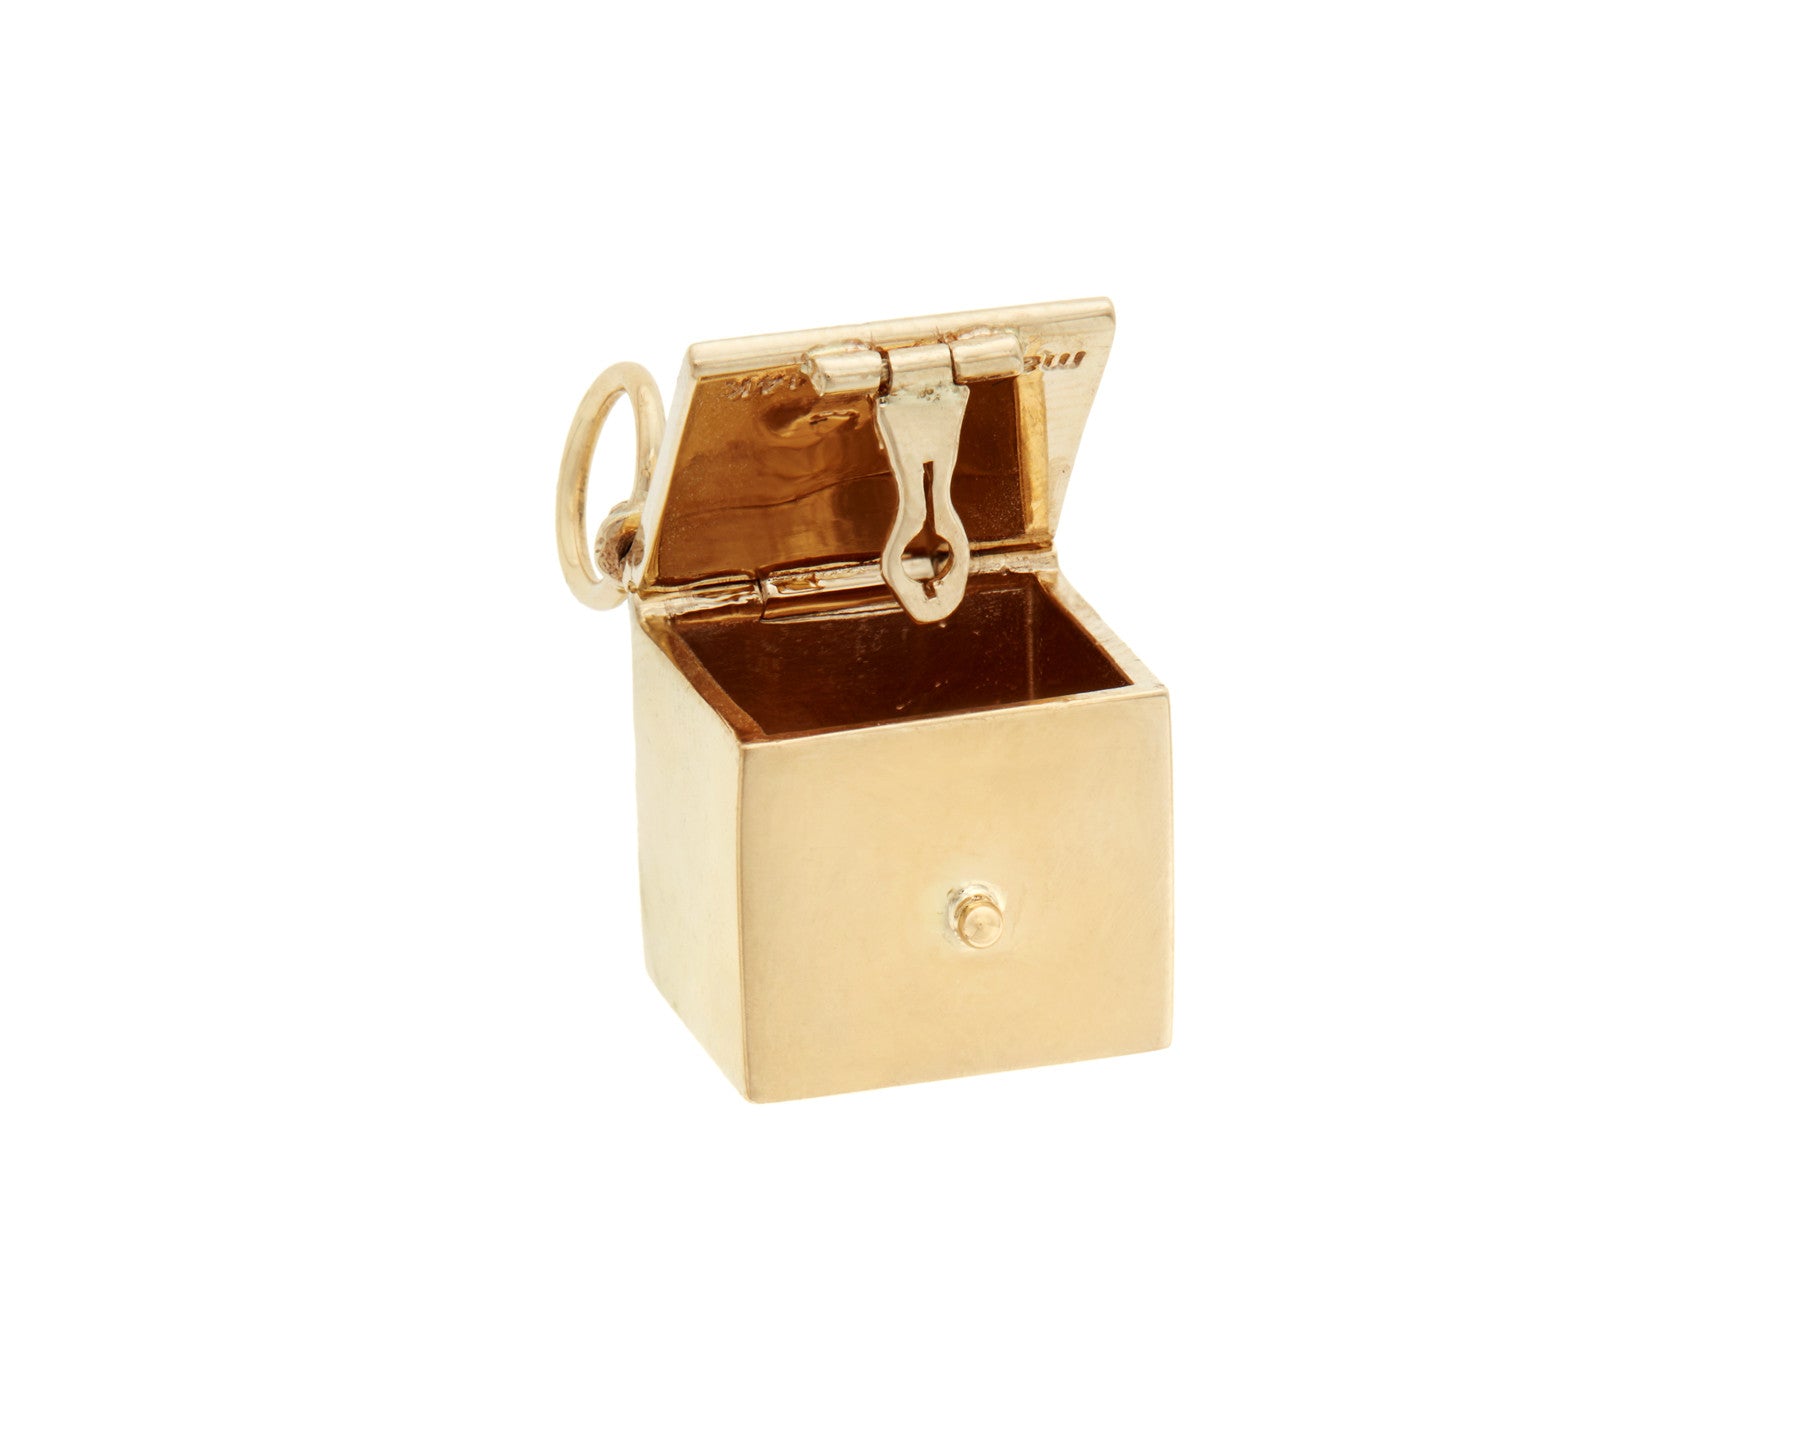 Gold charmed box with open lid against white backdrop